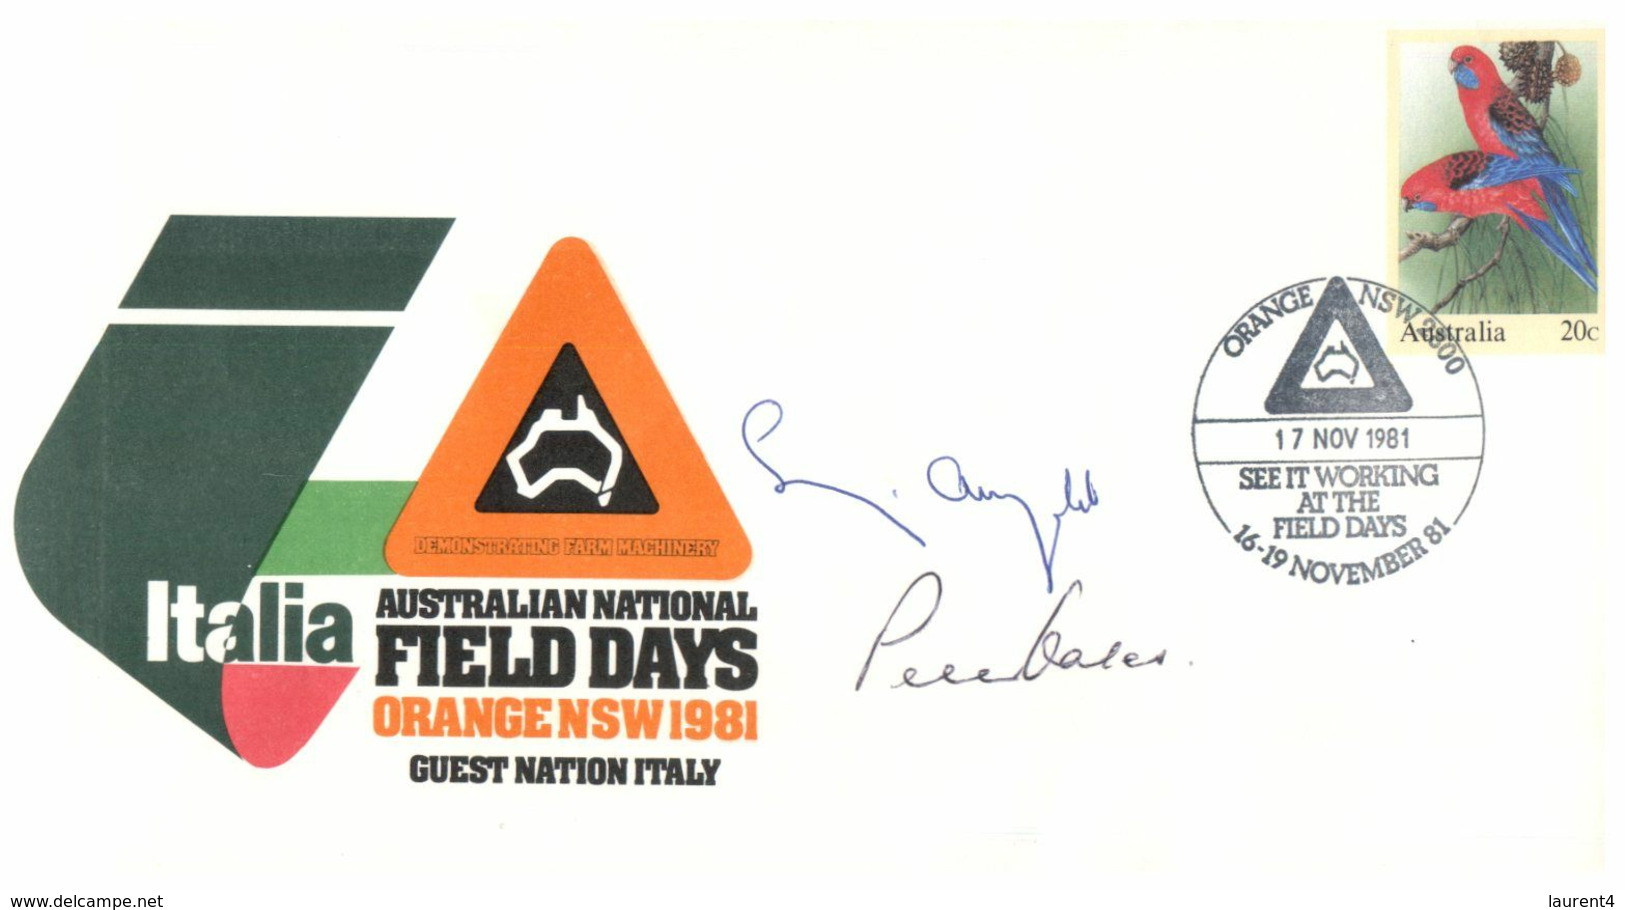 (N 15 A) Australia - 1981 - City Of Orange Italia Field Days (1 Cover Signed + 1 Card Stamped) (2 Items) - Agriculture